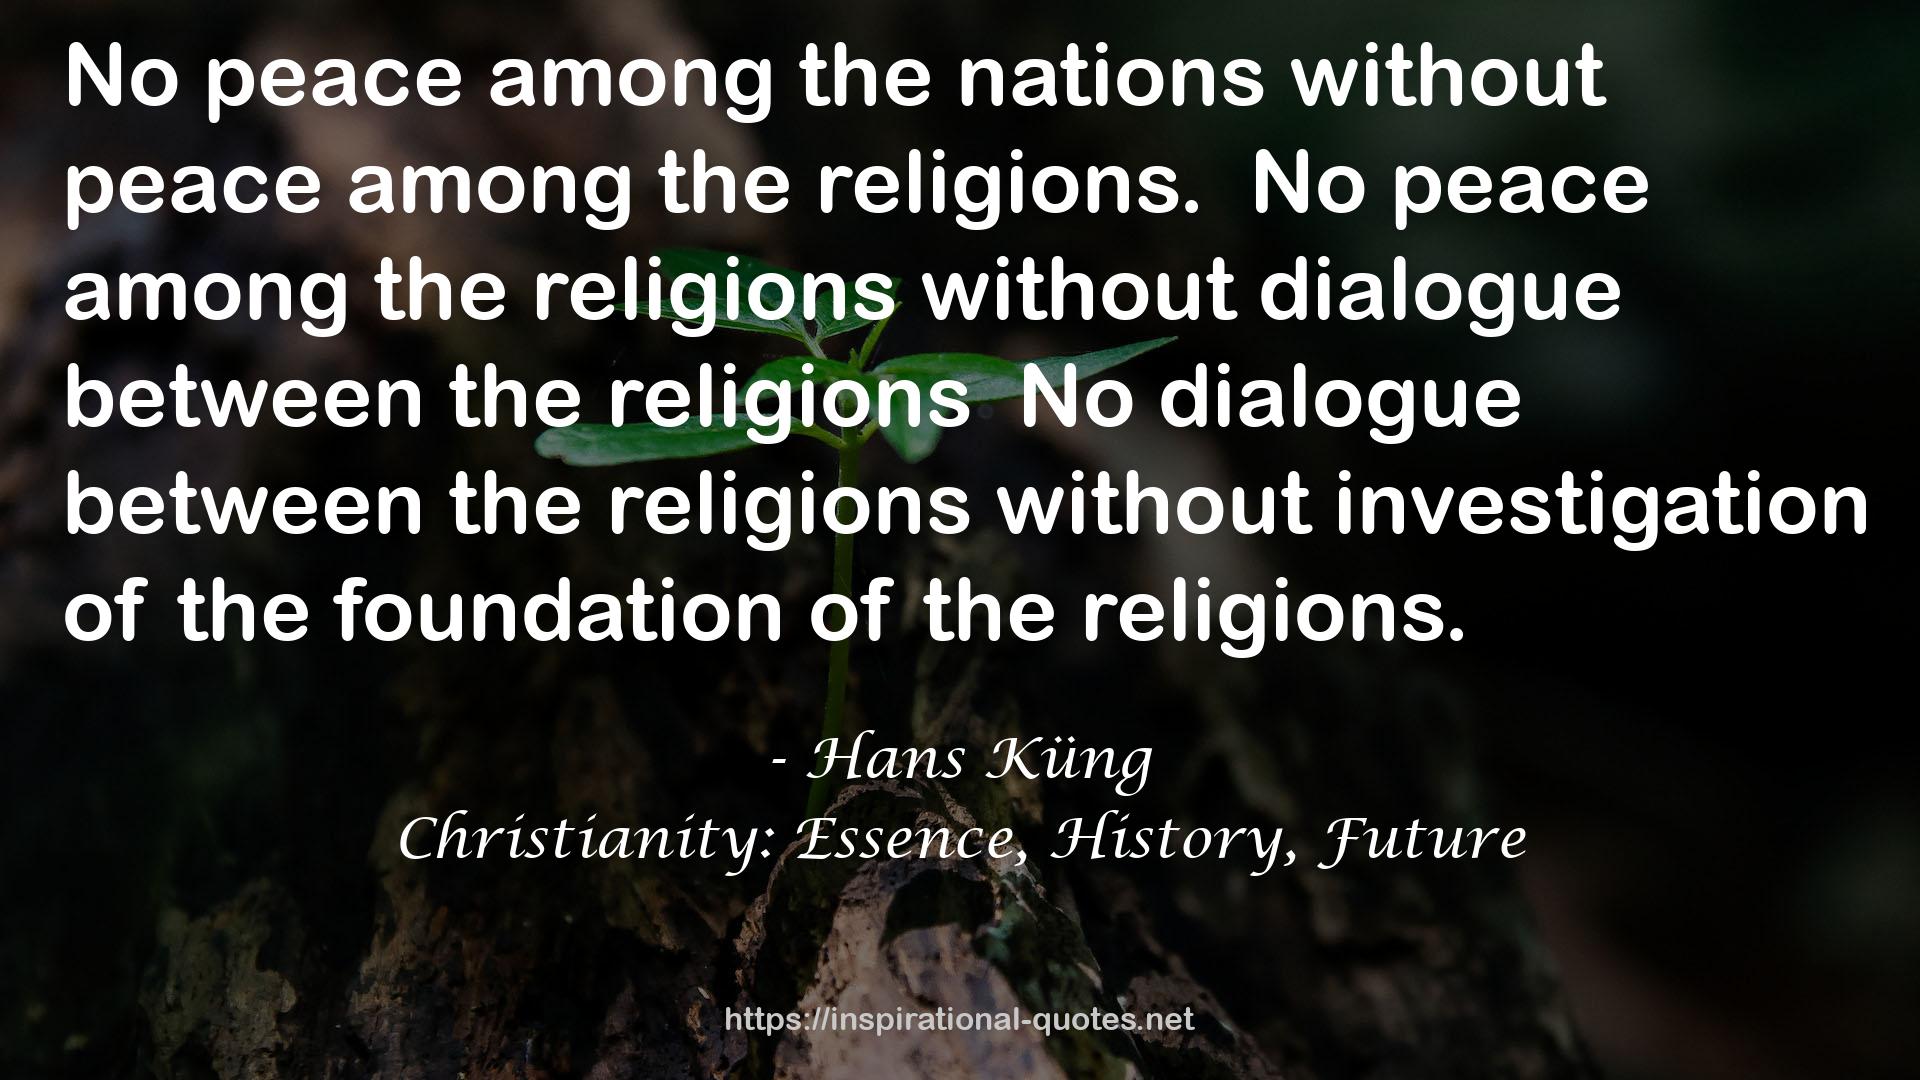 Christianity: Essence, History, Future QUOTES